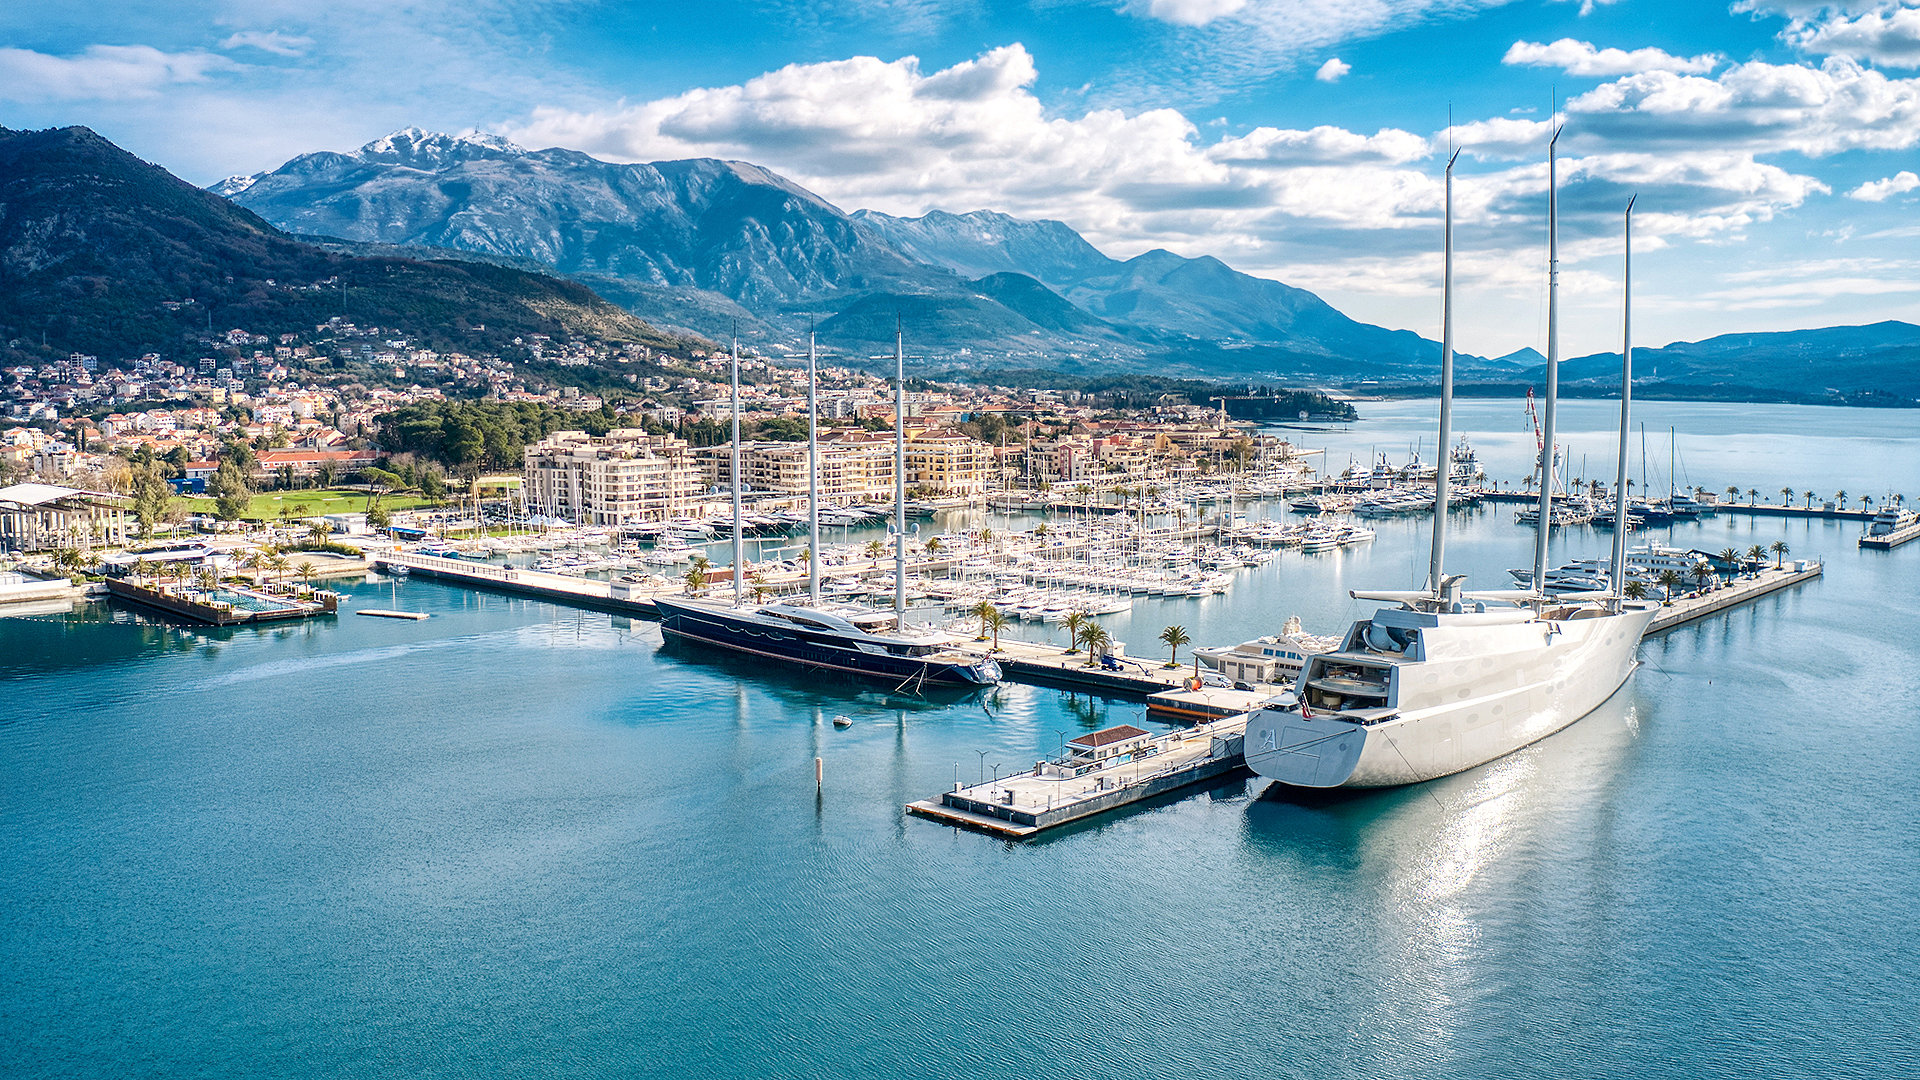 Porto Montenegro: super-yachts and social infrastructure